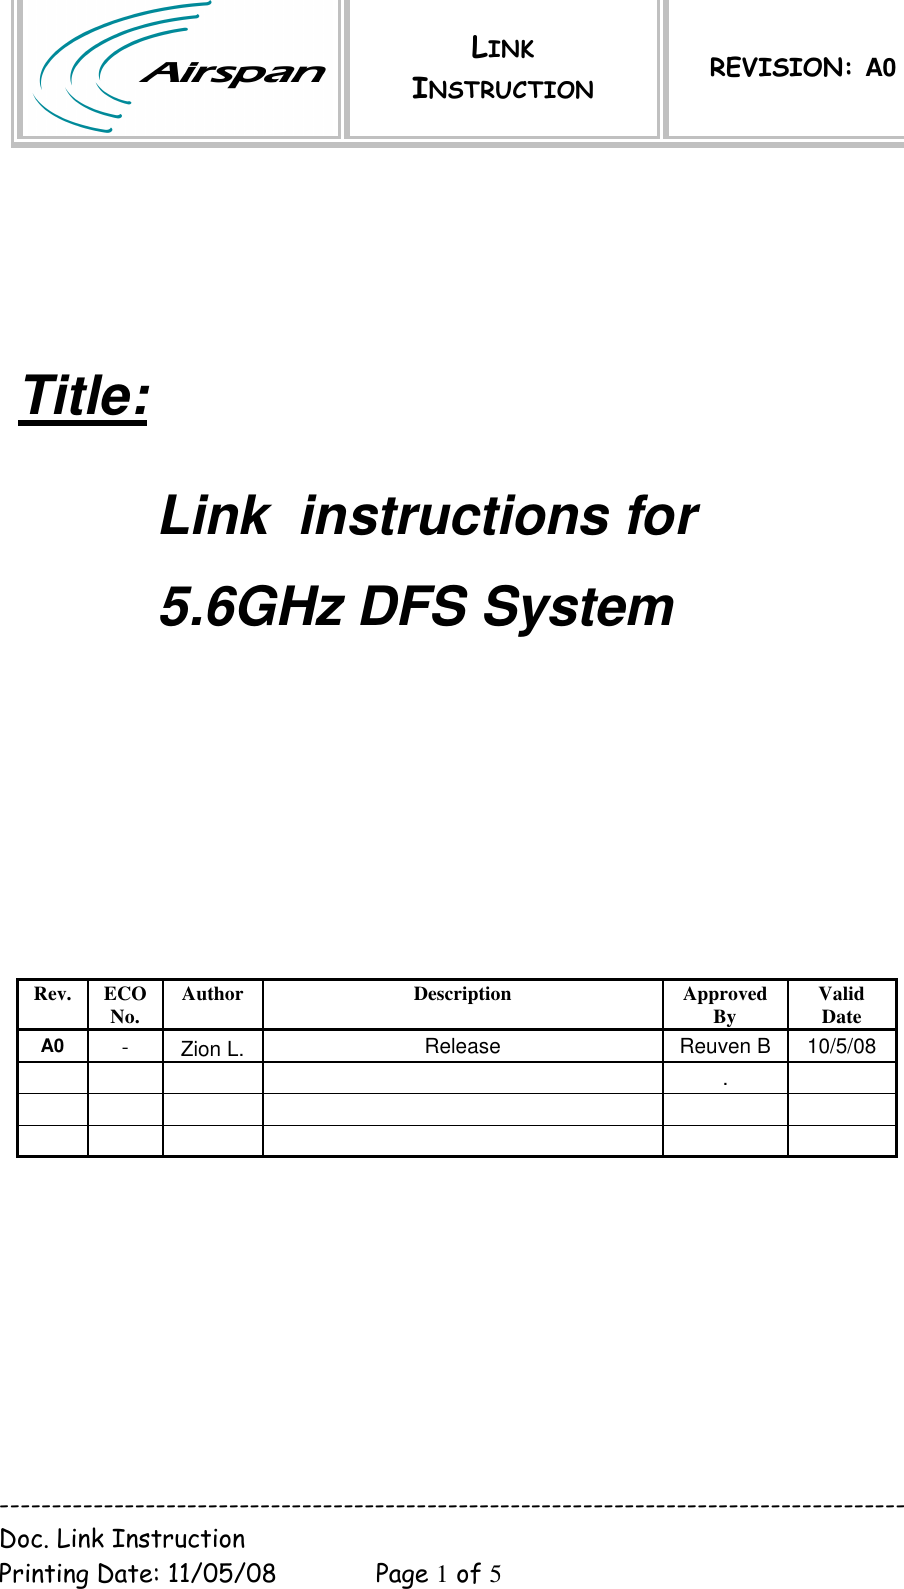  LINK INSTRUCTION REVISION: A0  --------------------------------------------------------------------------------------- Doc. Link Instruction   Printing Date: 11/05/08  Page 1 of 5     Title:   Link  instructions for   5.6GHz DFS System                   Rev.  ECO No.  Author  Description  Approved By  Valid Date A0   -    Zion L. Release    Reuven B   10/5/08          .                           